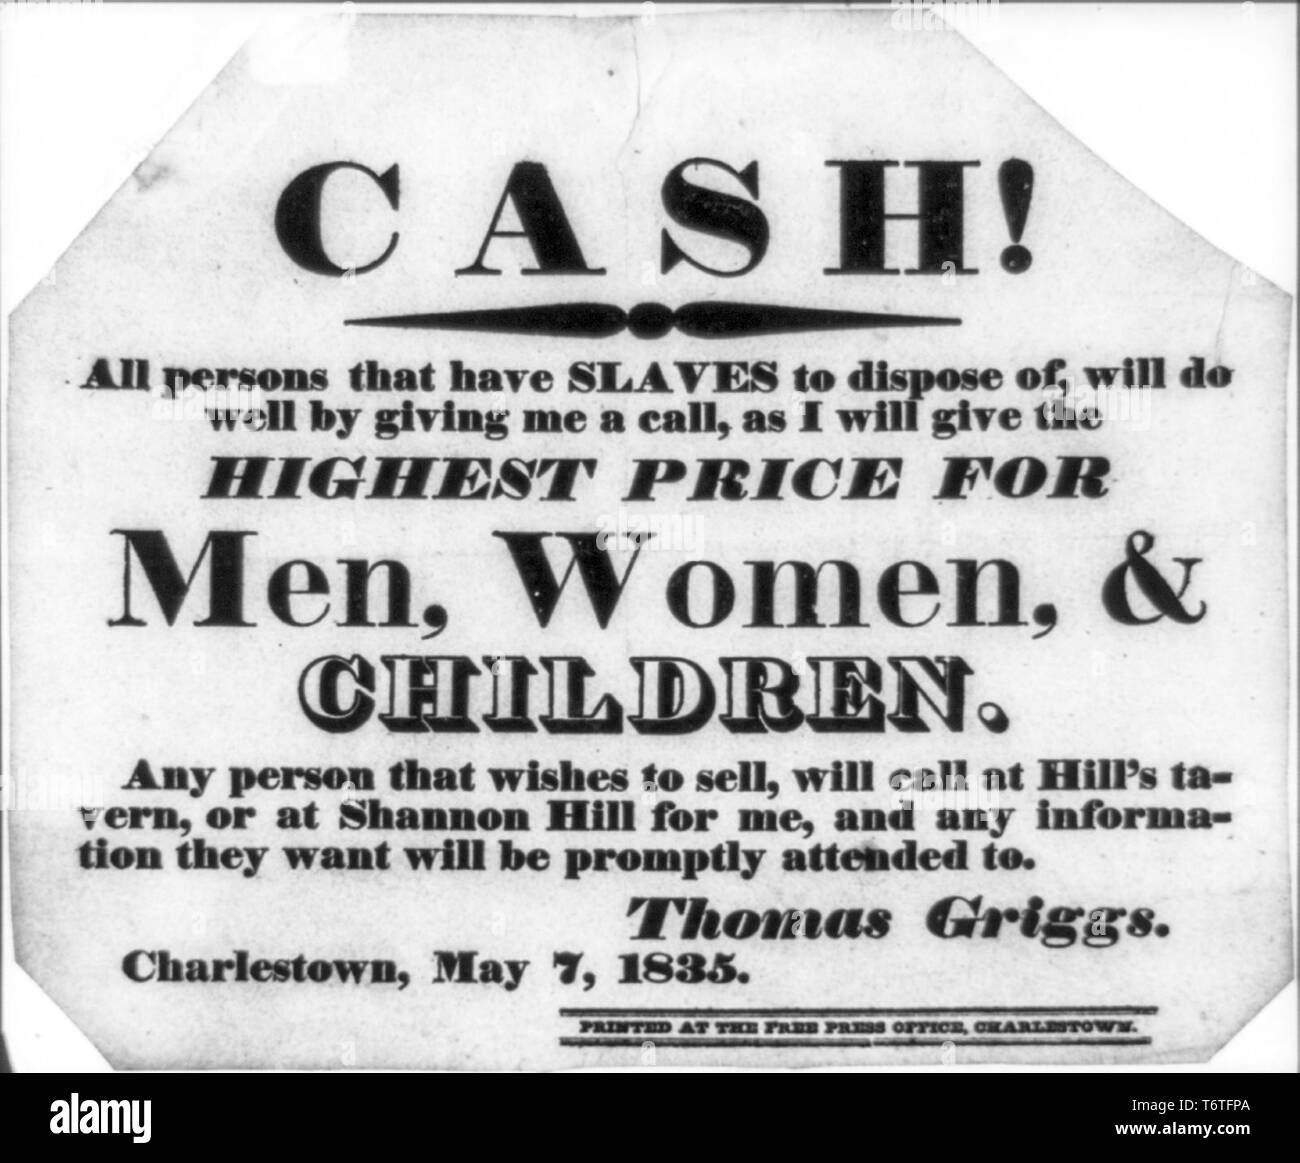 Cash! All person that have slaves to dispose of, ... advertisement for purchase of slaves by Thomas Griggs, Charlestown, 7 May 1835 Stock Photo